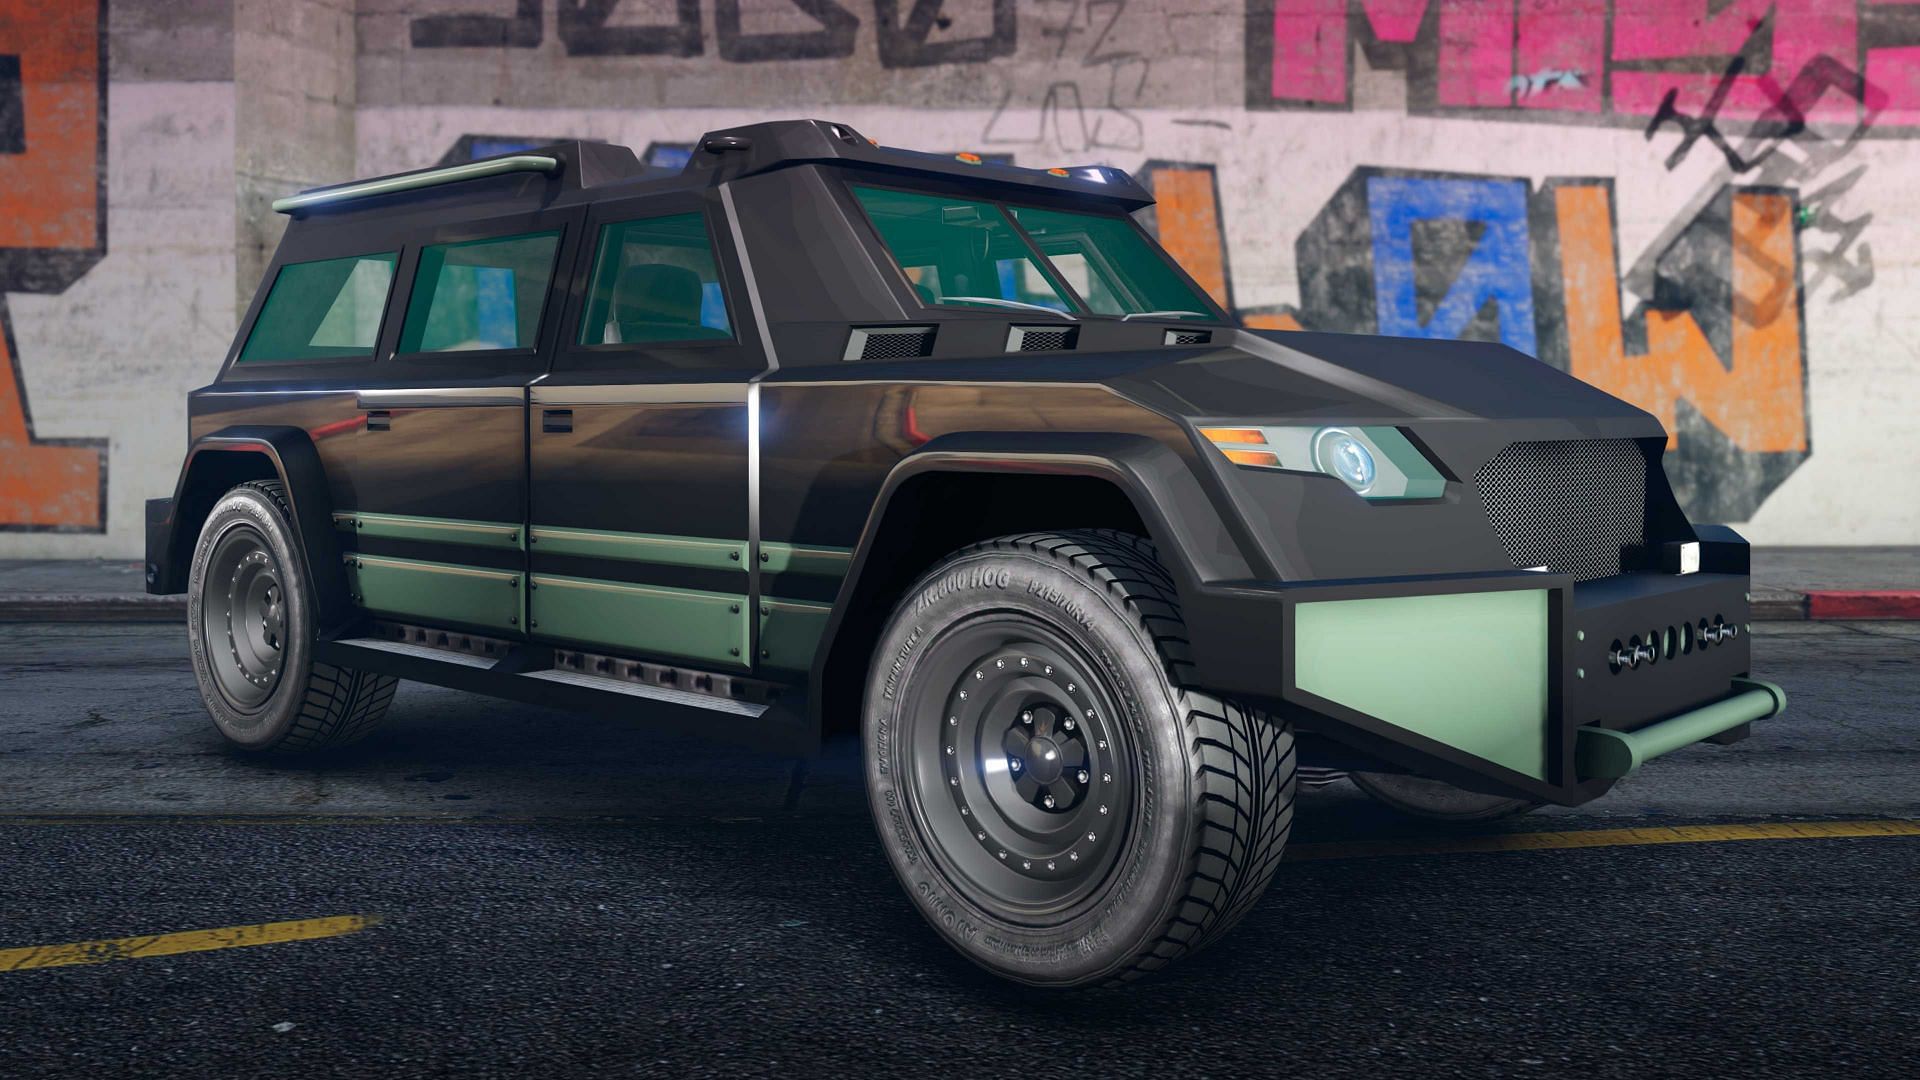 Best armored vehicles every GTA Online player should own